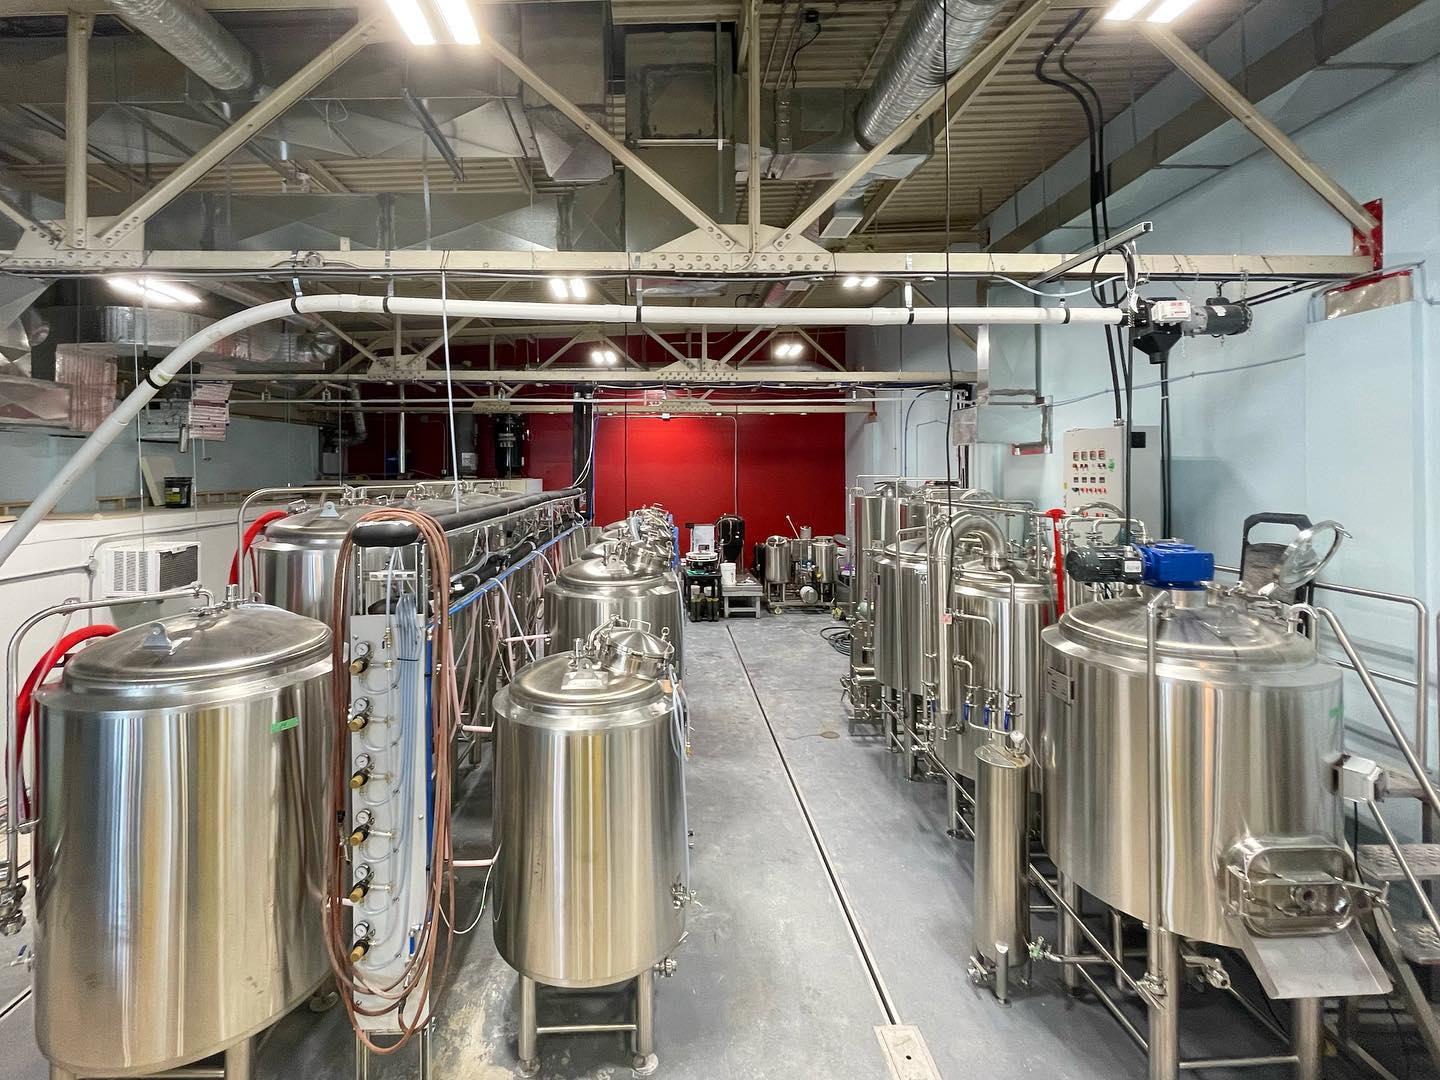 Devil May Care Brewing Company, TIANTAI brewery equipment, 500L Brewing System Installation in Canada, brewhouse vessel, beer fermenter, beer unitank, beer fermentor, fermentation tank, brewery machinery, beer brewing plant, conical pressure fermenter, brewery plant, microbrewery system